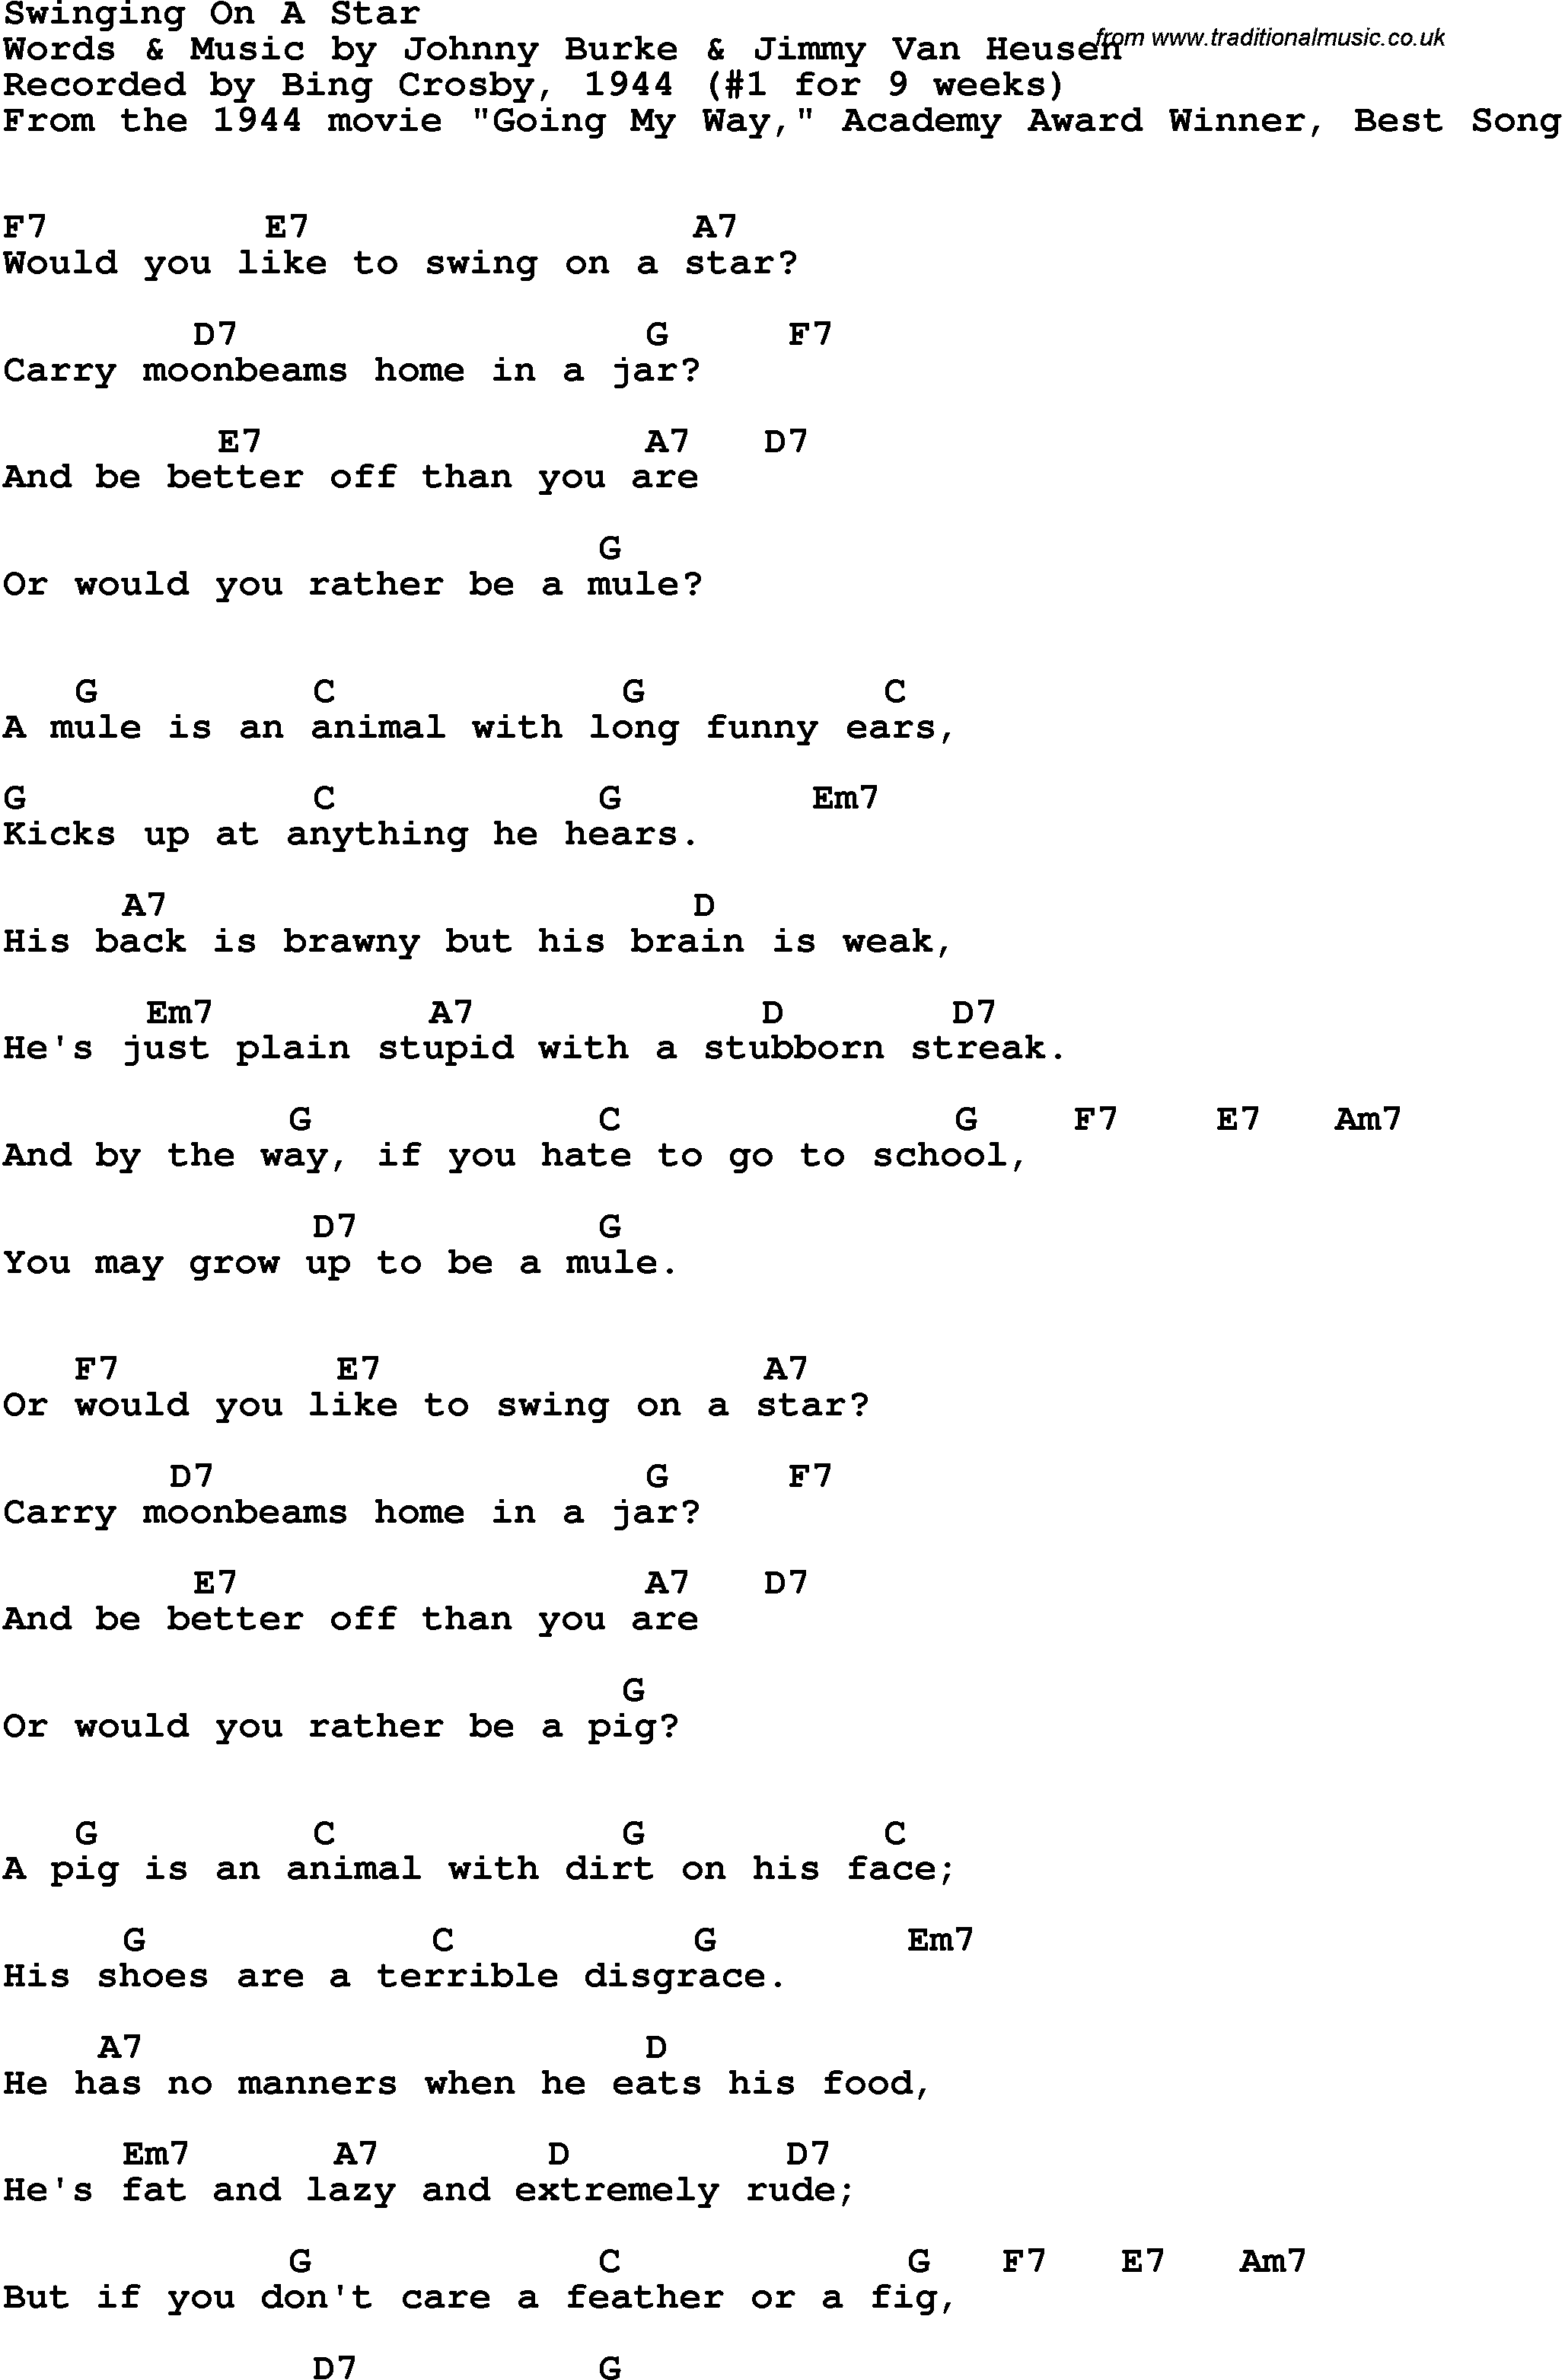 Song Lyrics with guitar chords for Swingin' On A Star - Bing Crosby, 1944